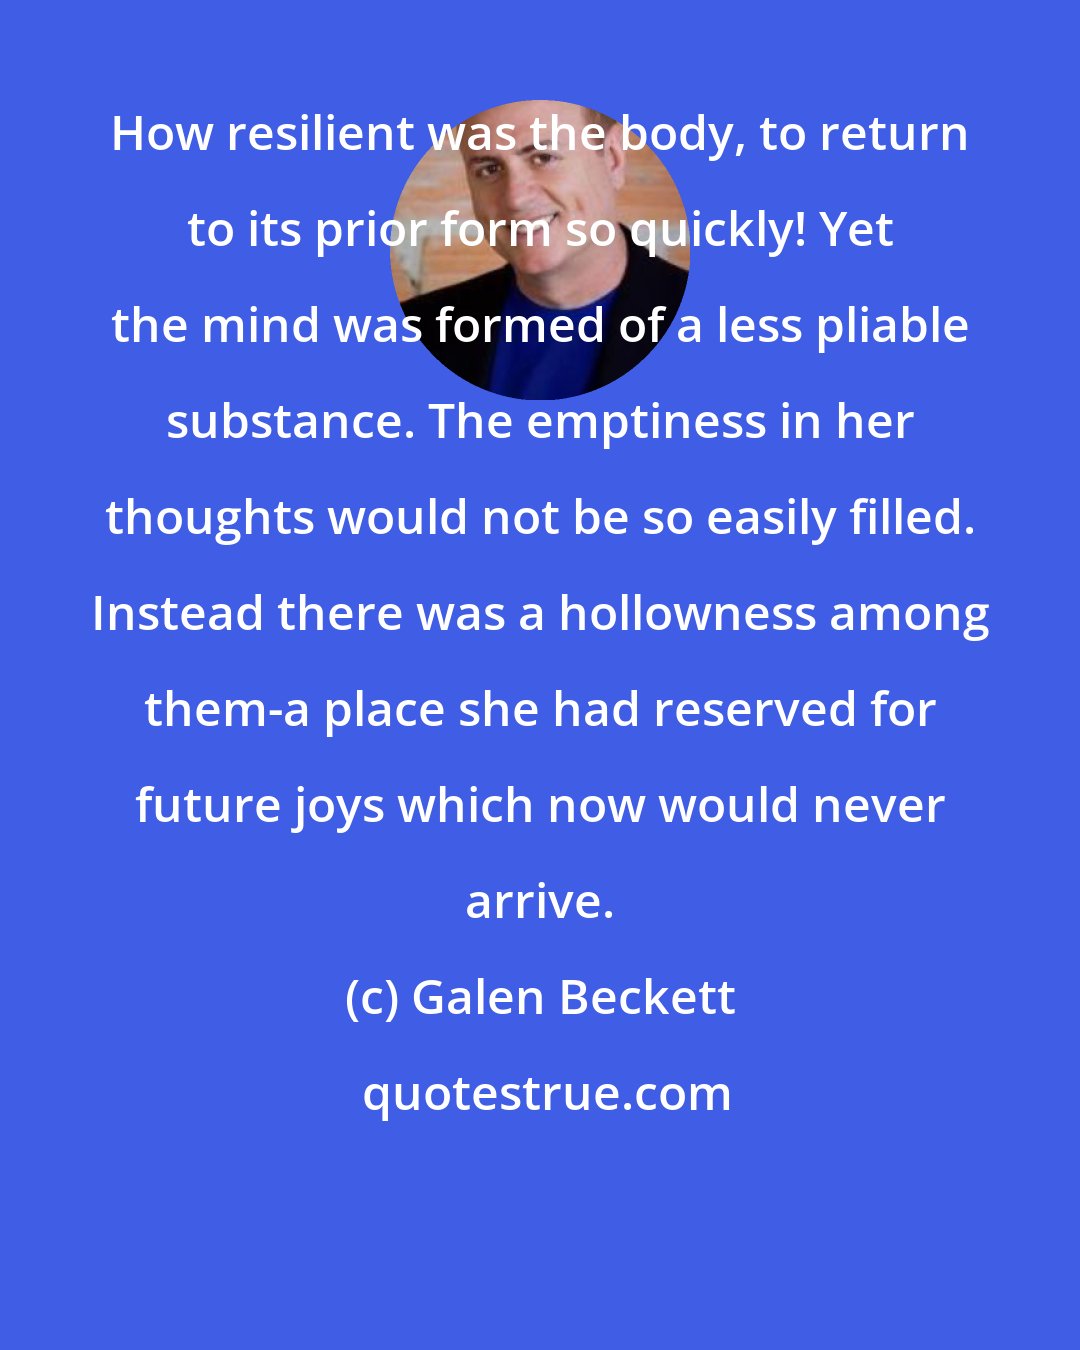 Galen Beckett: How resilient was the body, to return to its prior form so quickly! Yet the mind was formed of a less pliable substance. The emptiness in her thoughts would not be so easily filled. Instead there was a hollowness among them-a place she had reserved for future joys which now would never arrive.